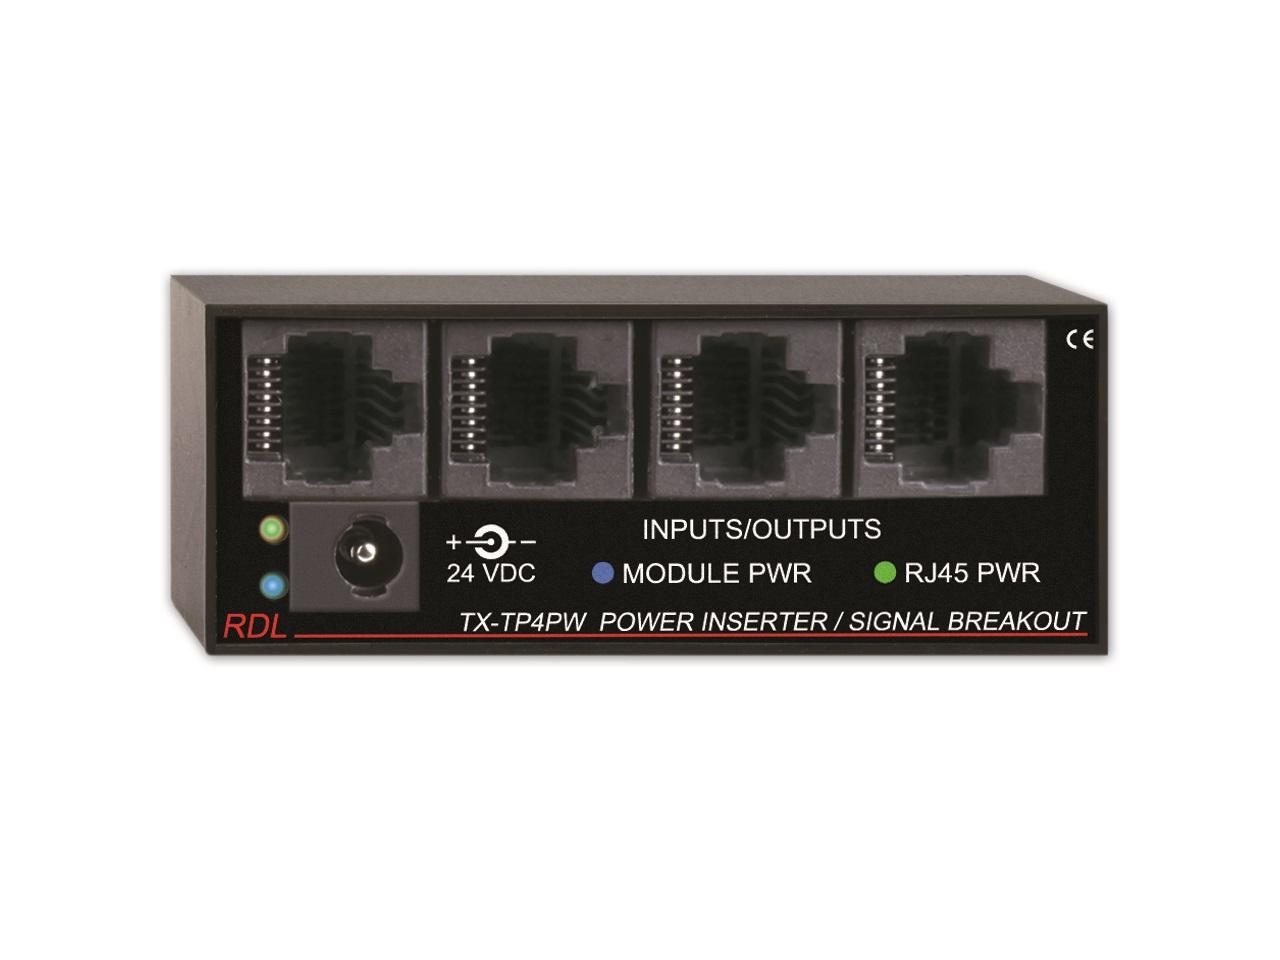 TX-TP4PW Power Inserter/Signal Breakout - Twisted Pair Format-A by RDL